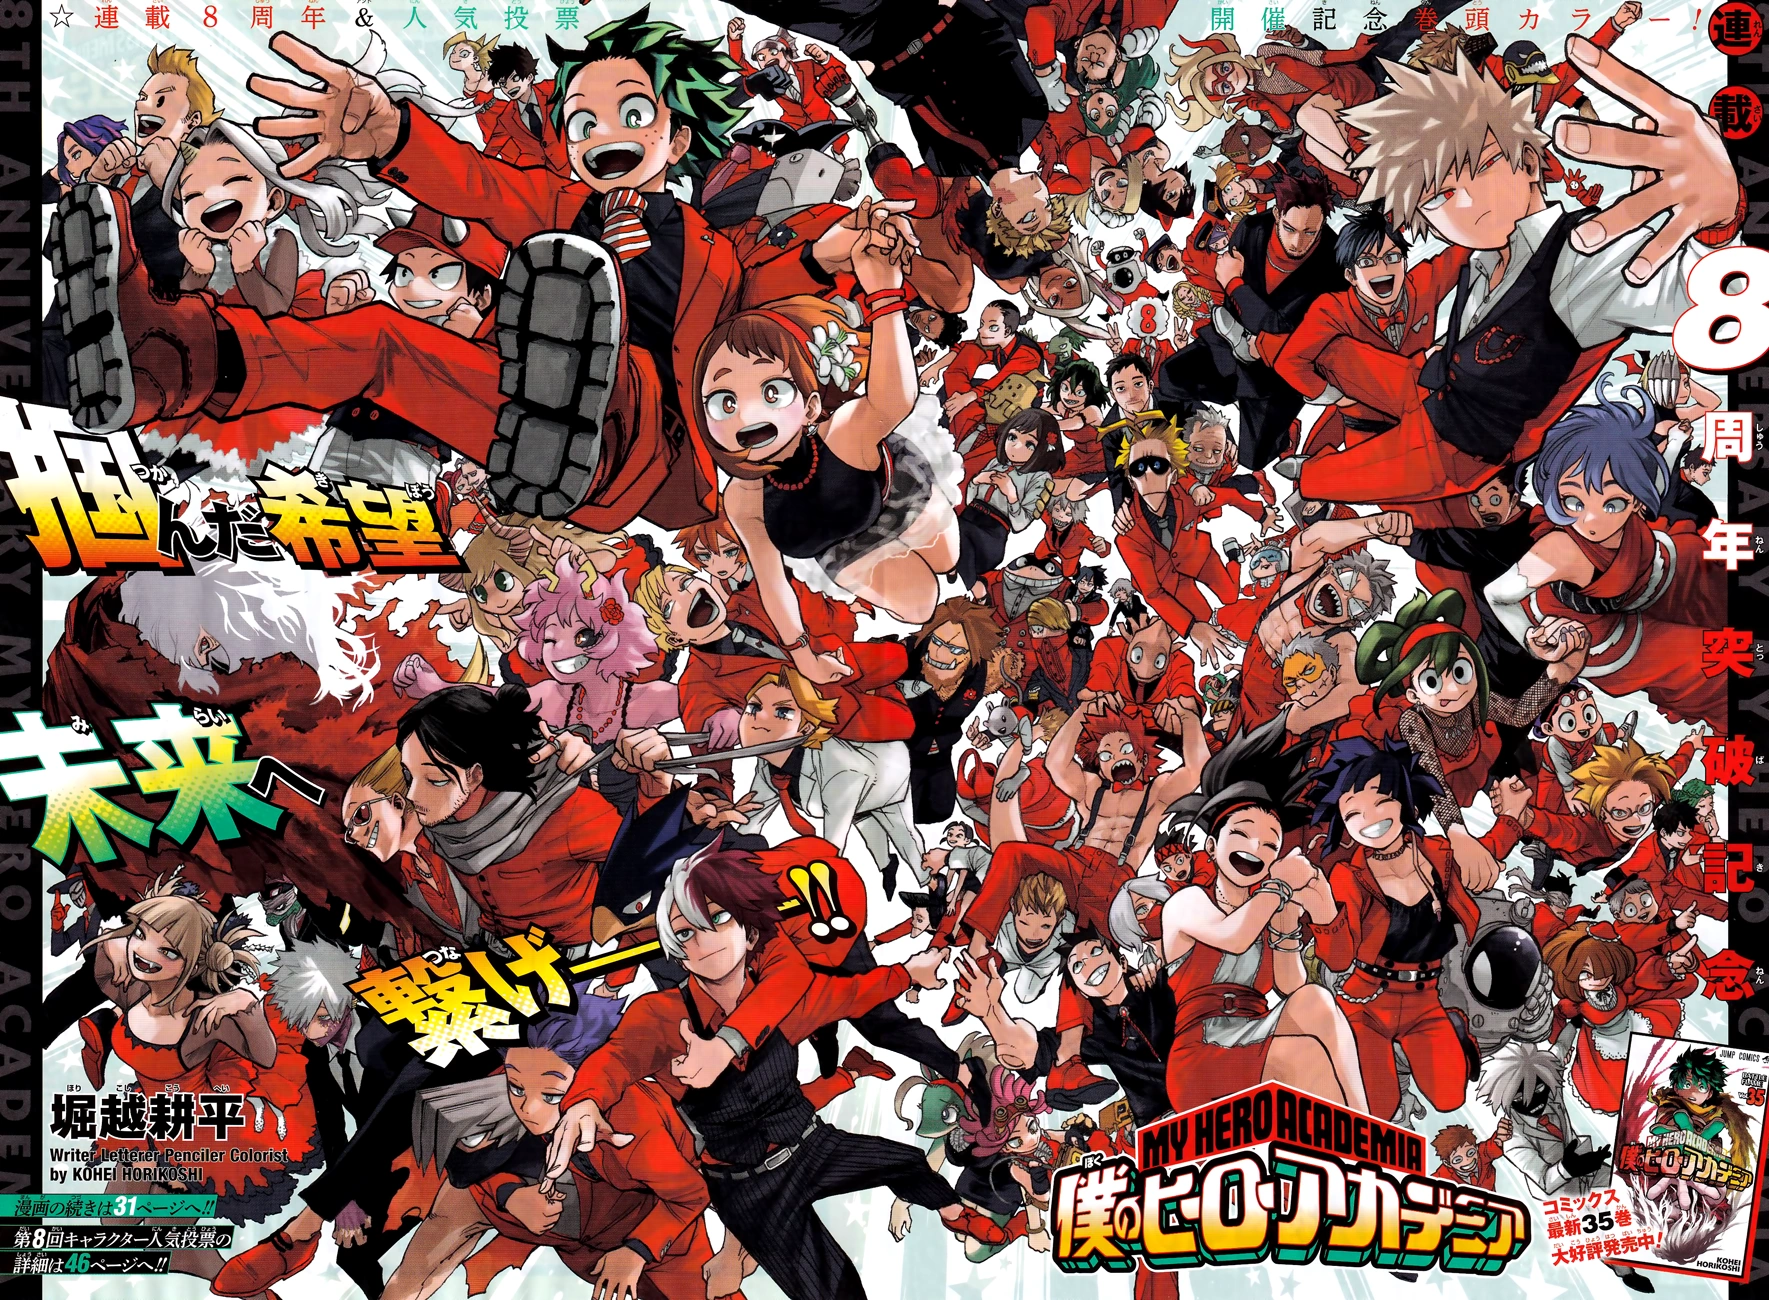 The cast of My Hero Academia in Kohei Horikoshi's color spread to Ch 359 'Place of Learning" (2022), Shueisha via digital issue